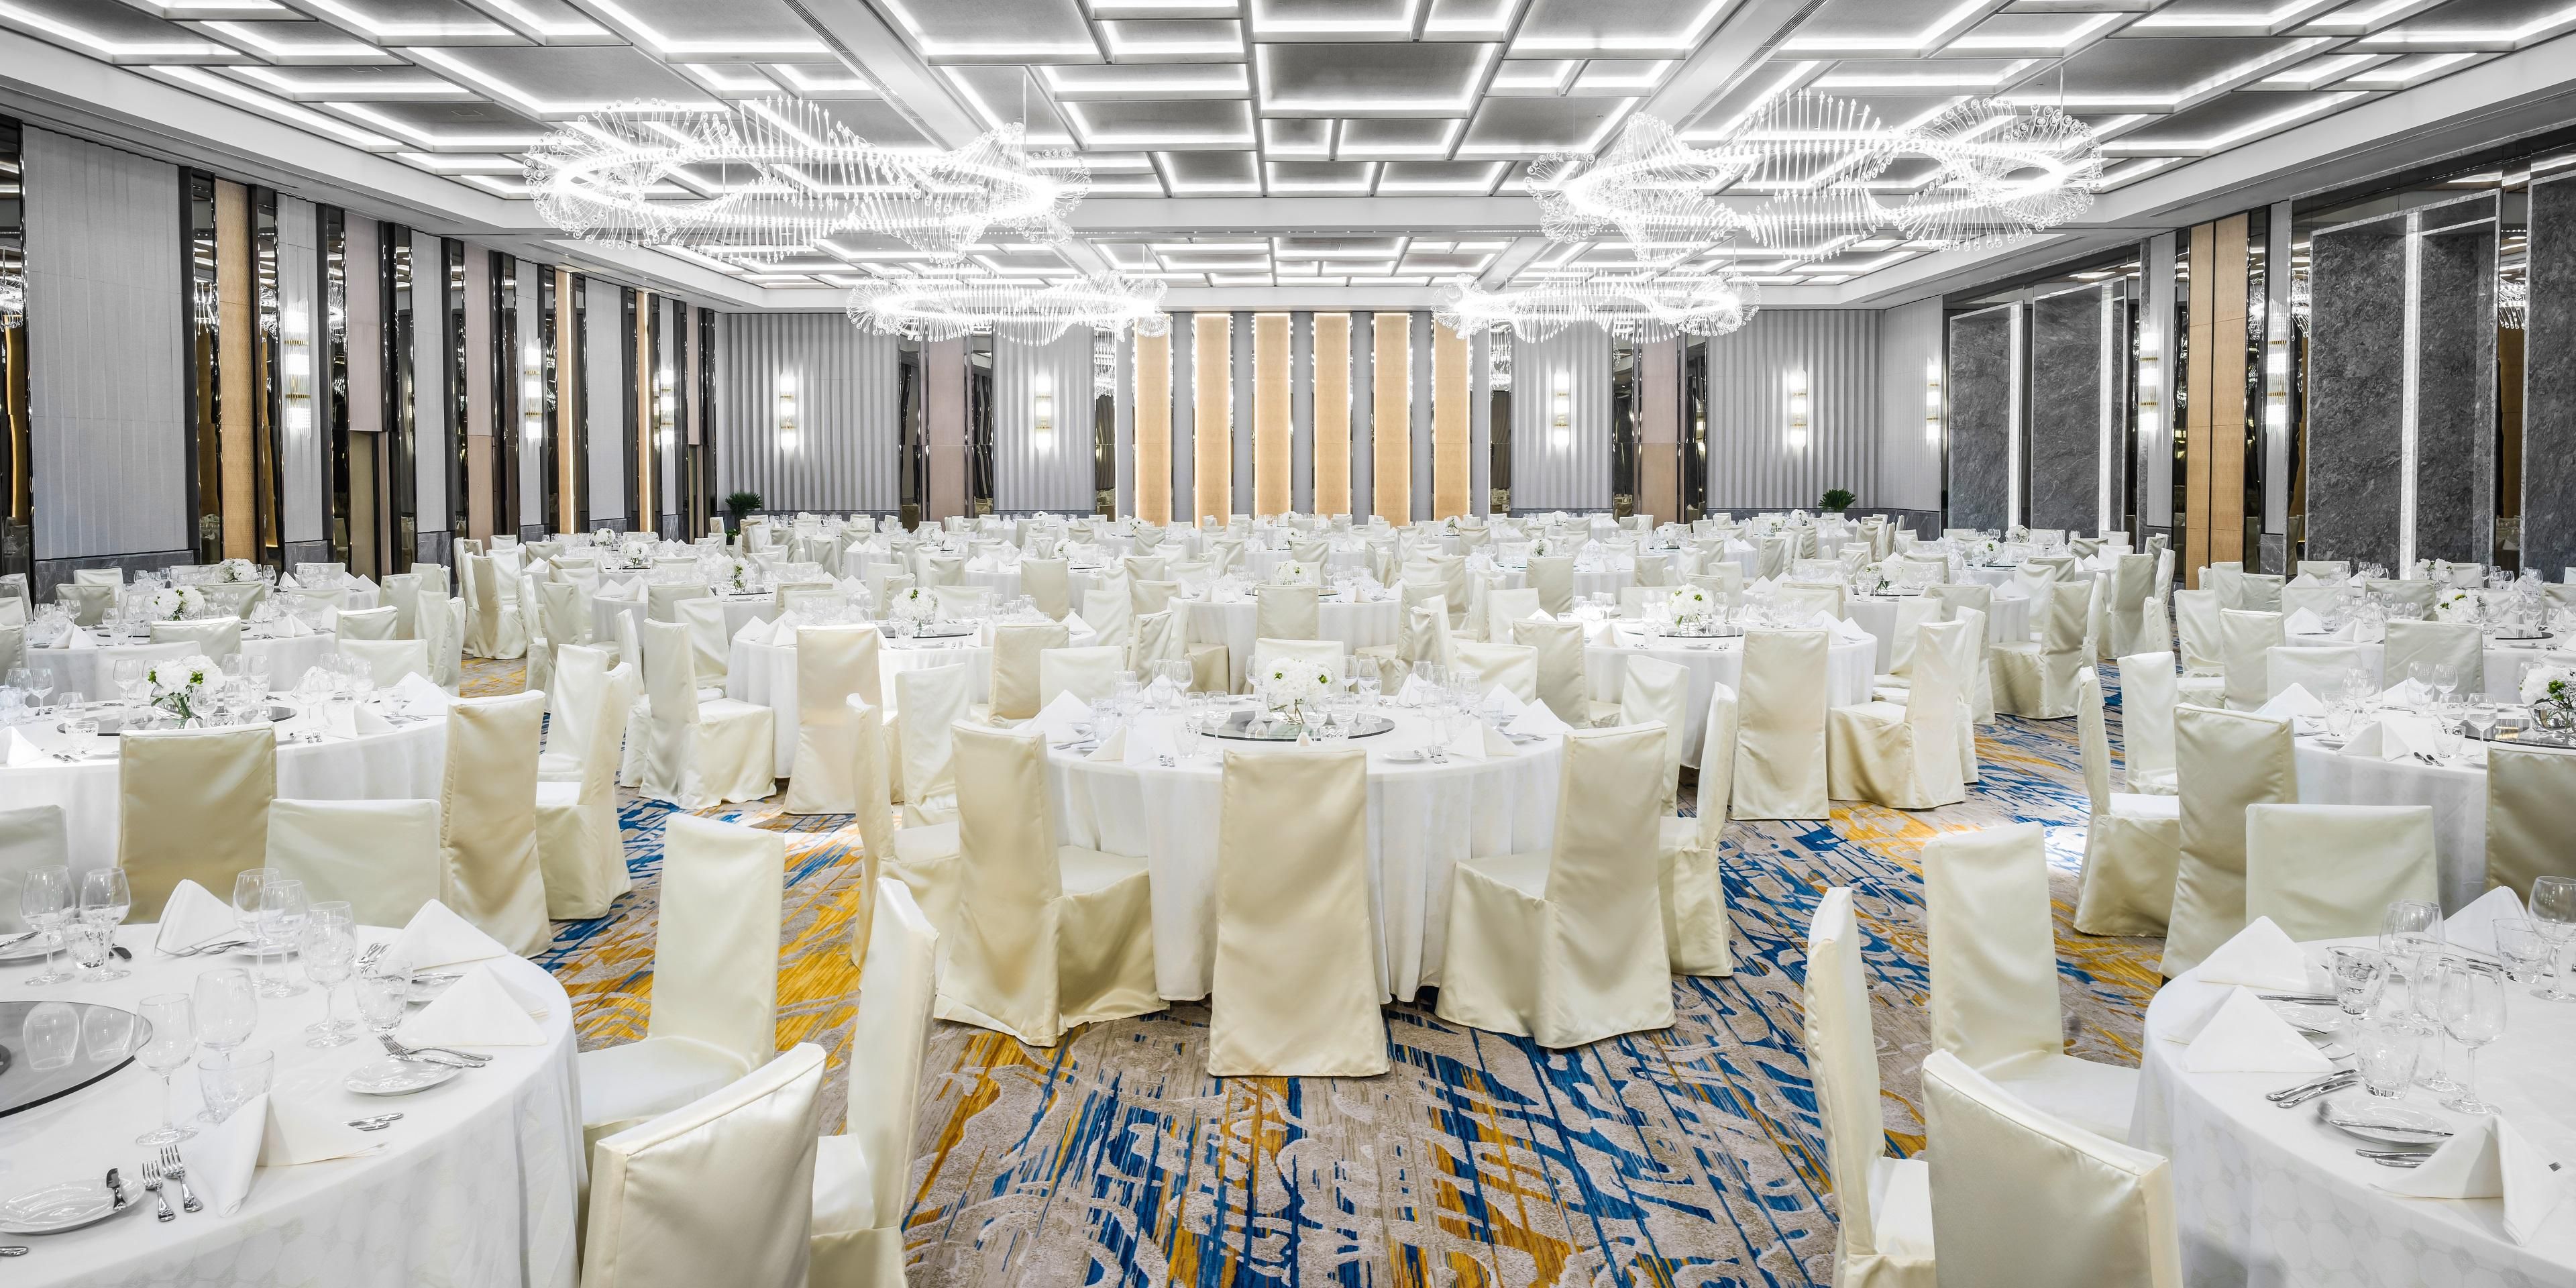 The resort features over 2,300 sqm of distinctive indoor event venues that include the Grand Ballroom, Junior Ballroom, meeting rooms, board rooms and the island’s only Theatre. Additionally, there are numerous outdoor venues including pool side and beach.